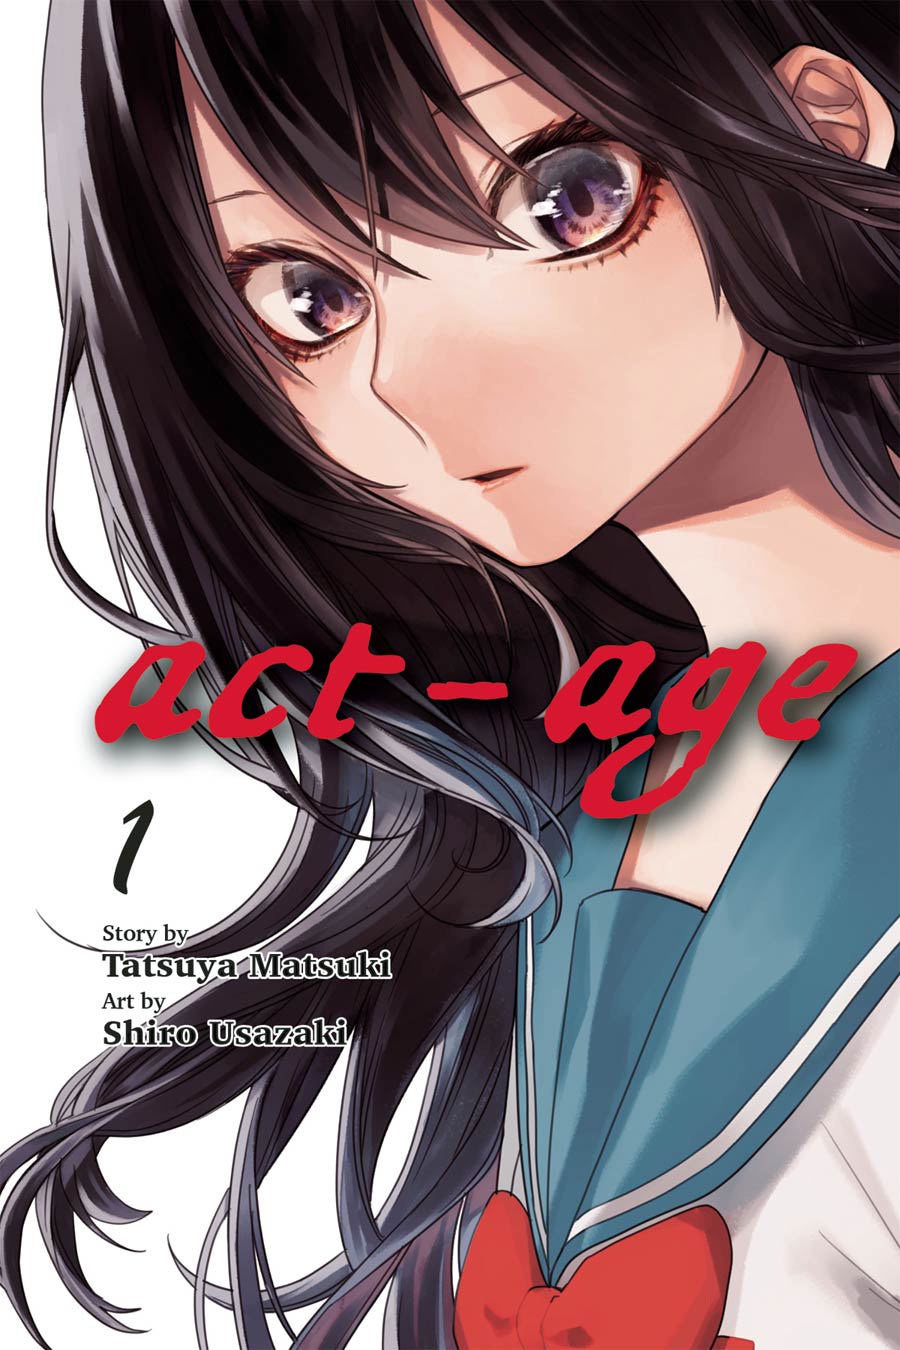 Act-Age Vol 1 GN